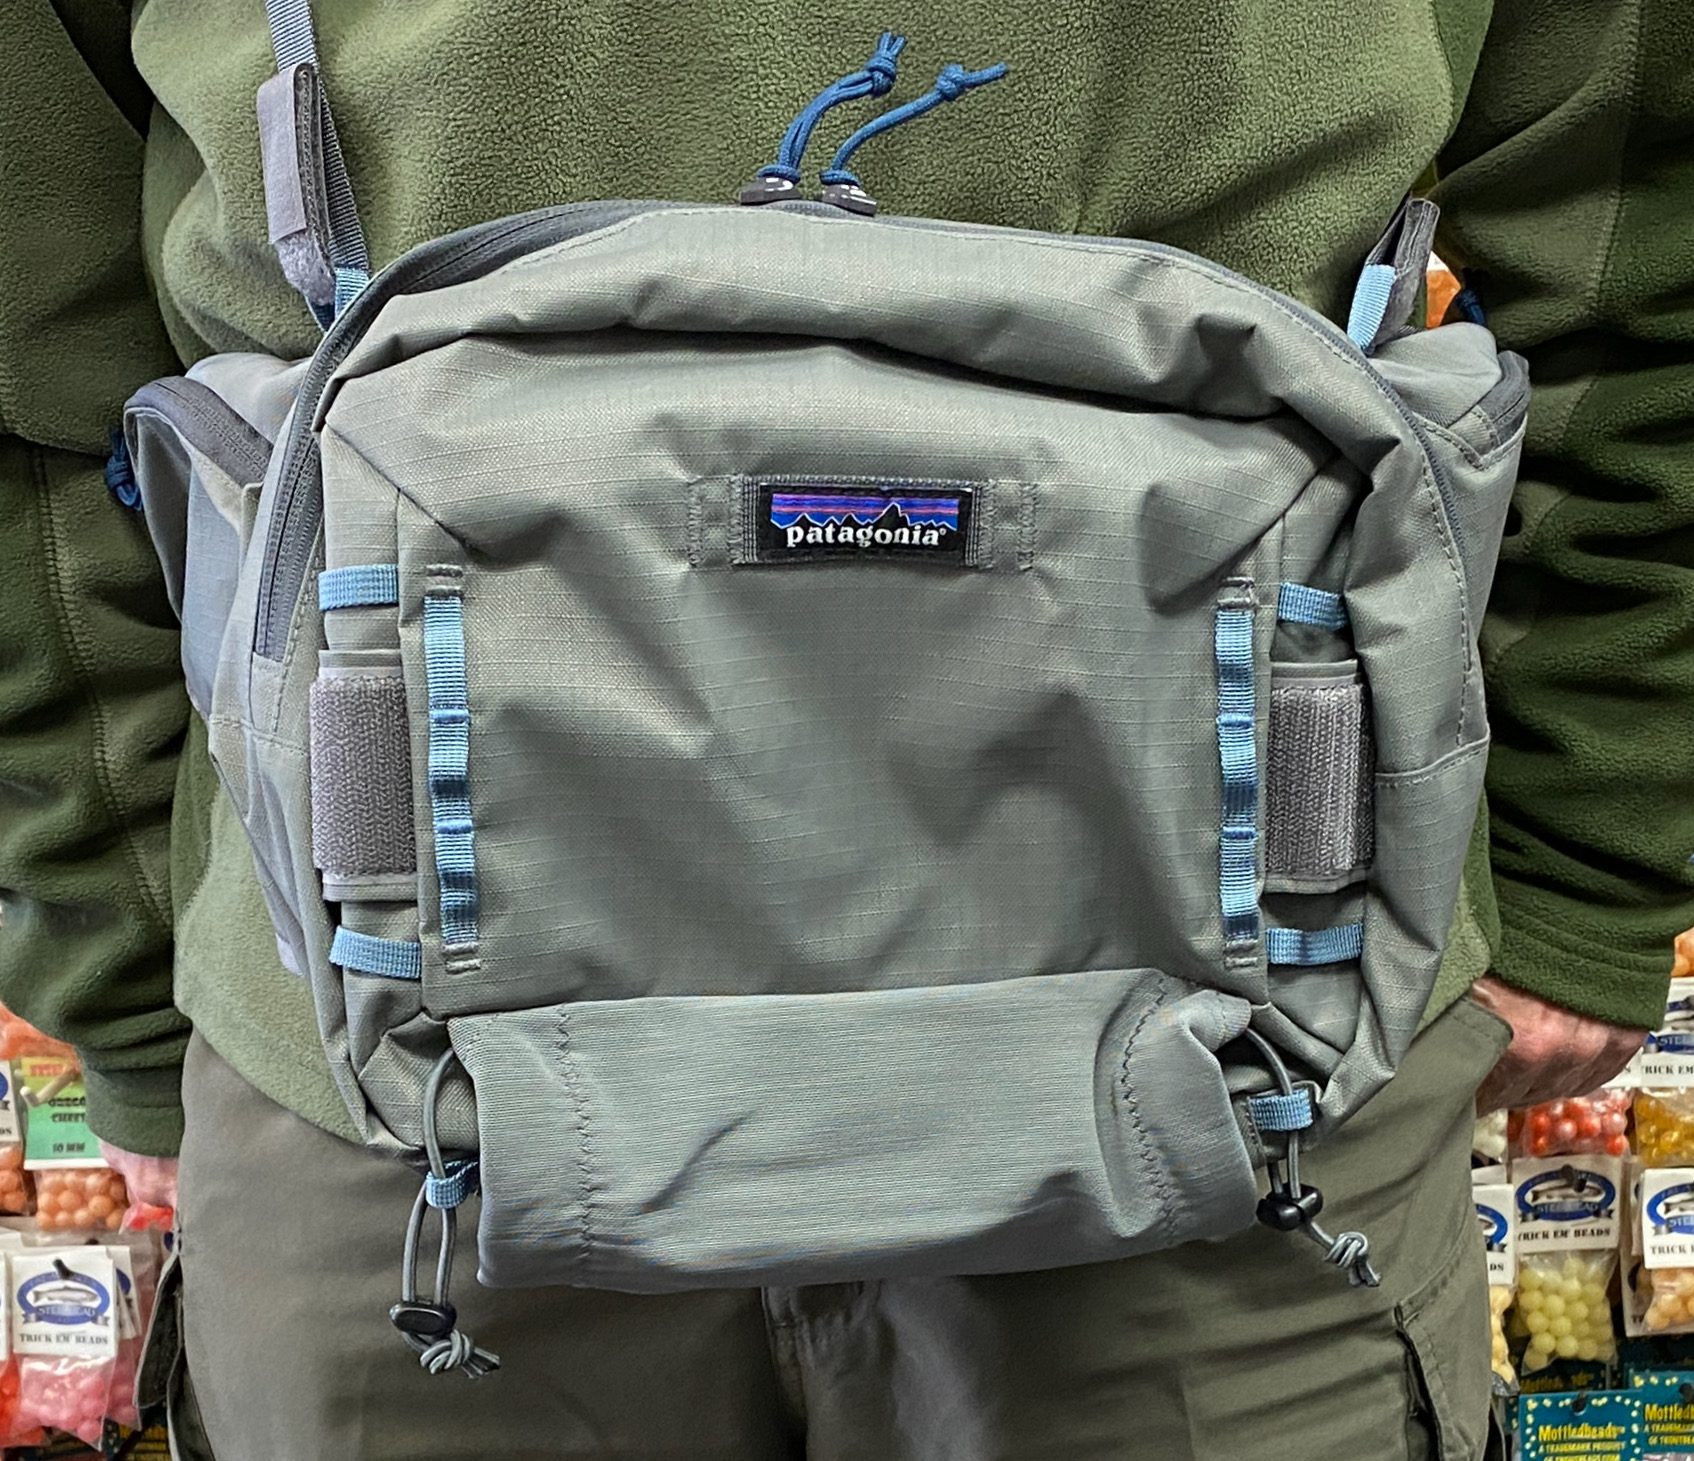 Patagonia Stealth Hip Pack - NEVER USED! - $95